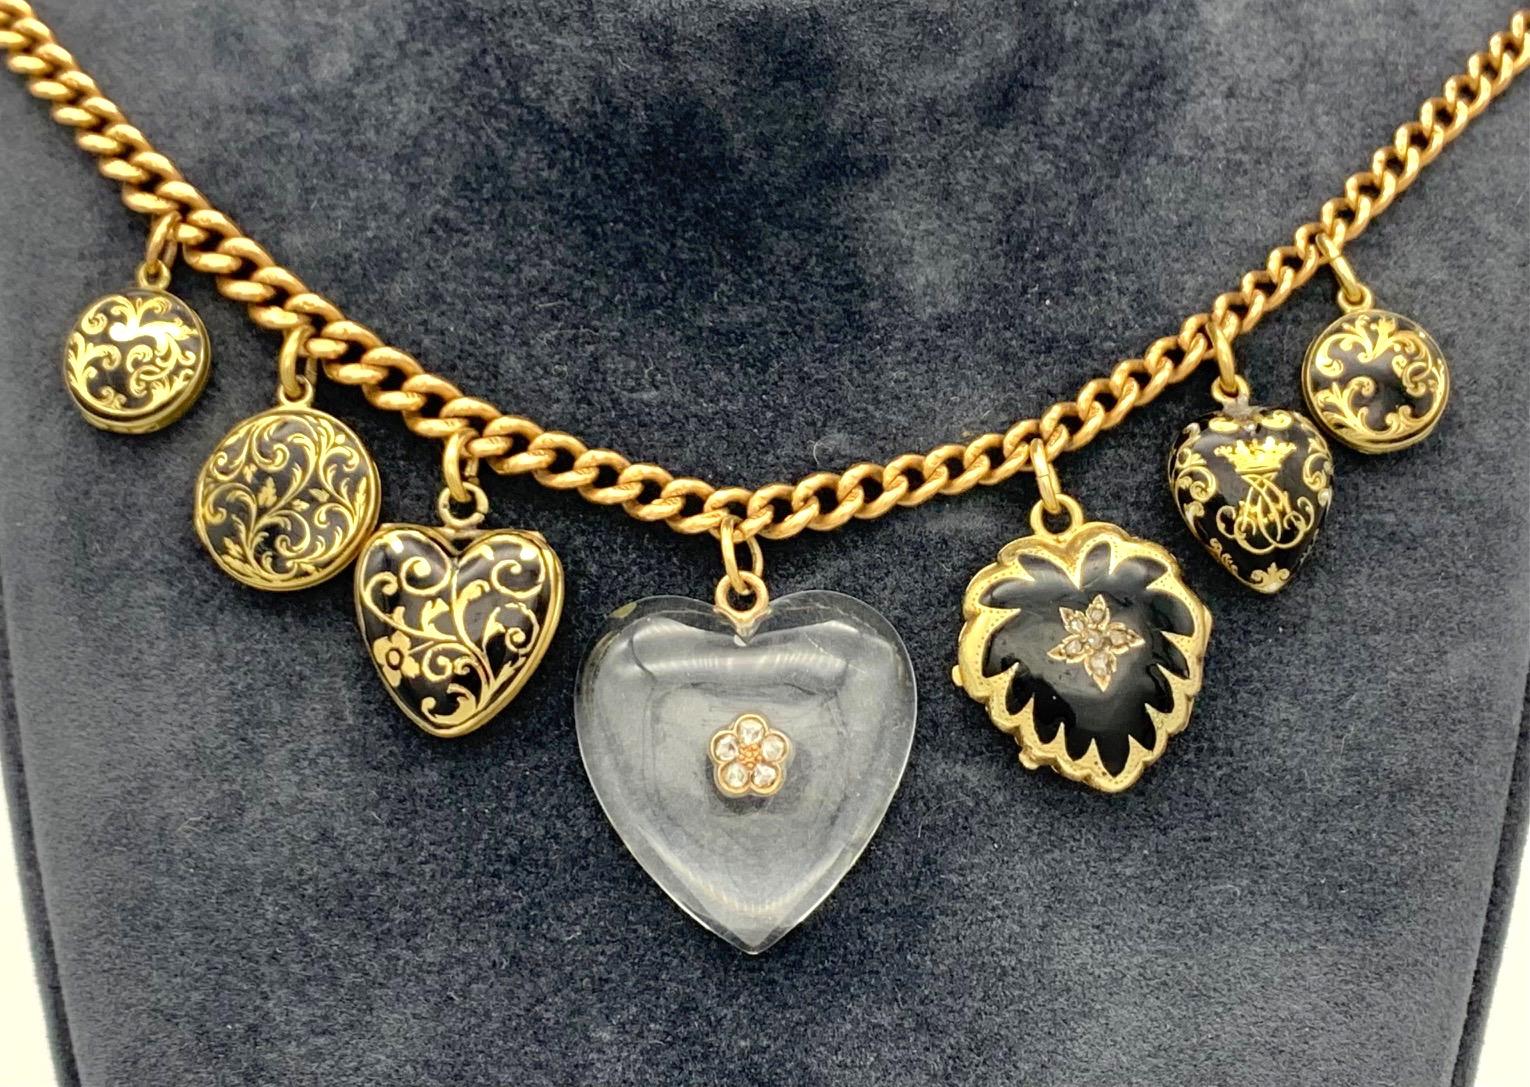 Wonderful necklace made out of four hearts, three of them are lockets anf the largest heart in the center is a wonderful heart shaped rock crystal cabochon. The other pendants are three round enamelled lockets. All the pendants are suspended from a